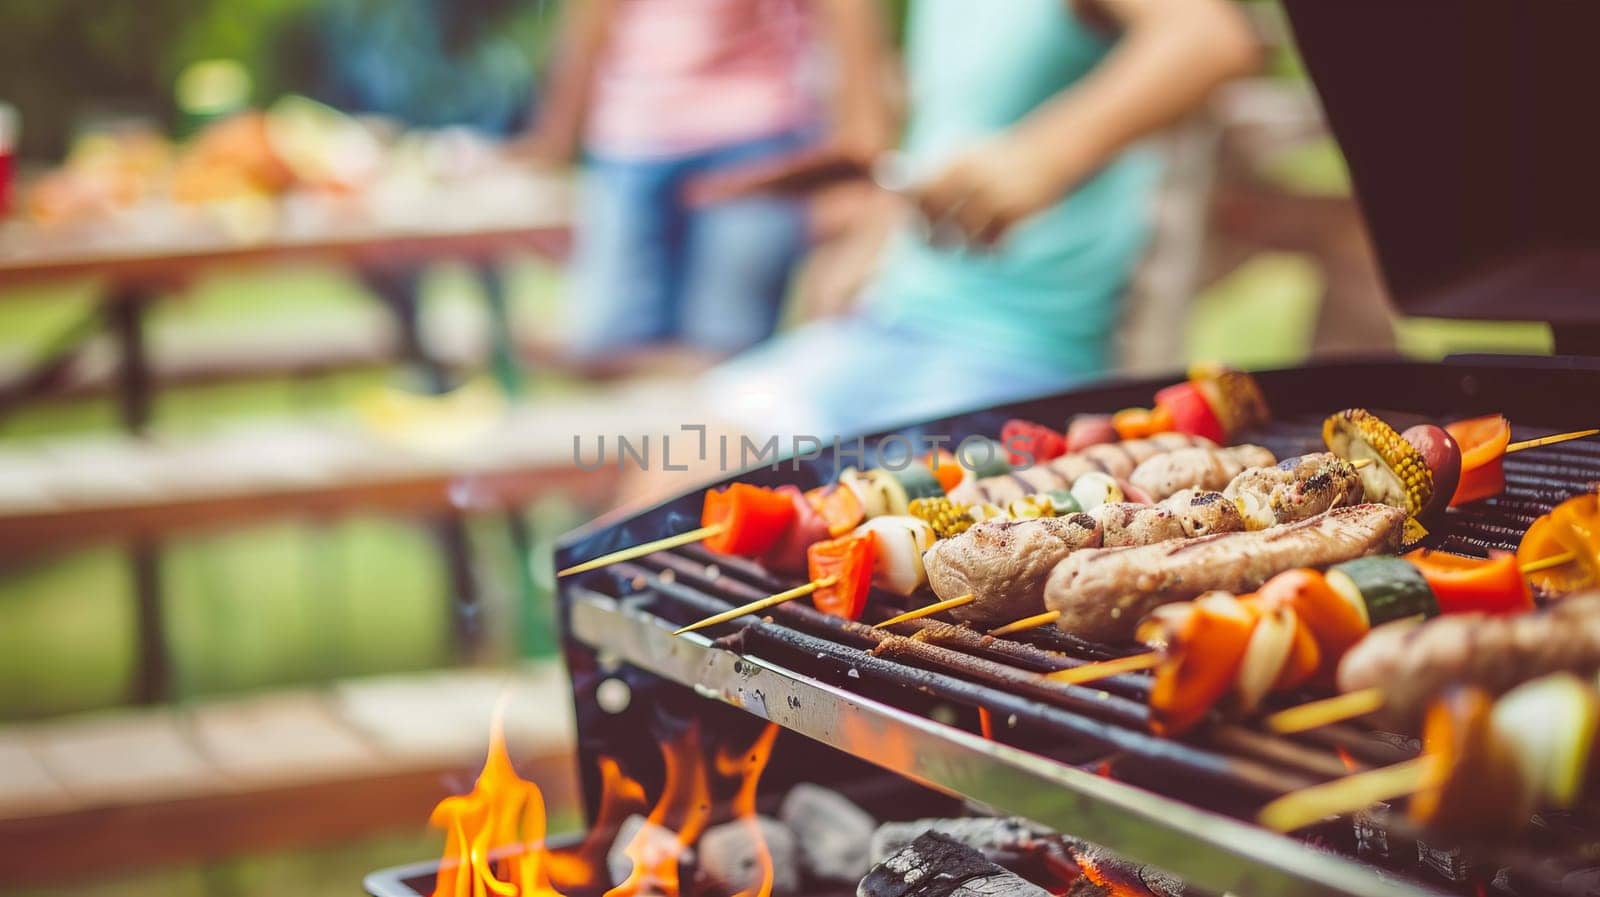 Grilling in the Backyard Barbecue with a blurred background, with copy space.